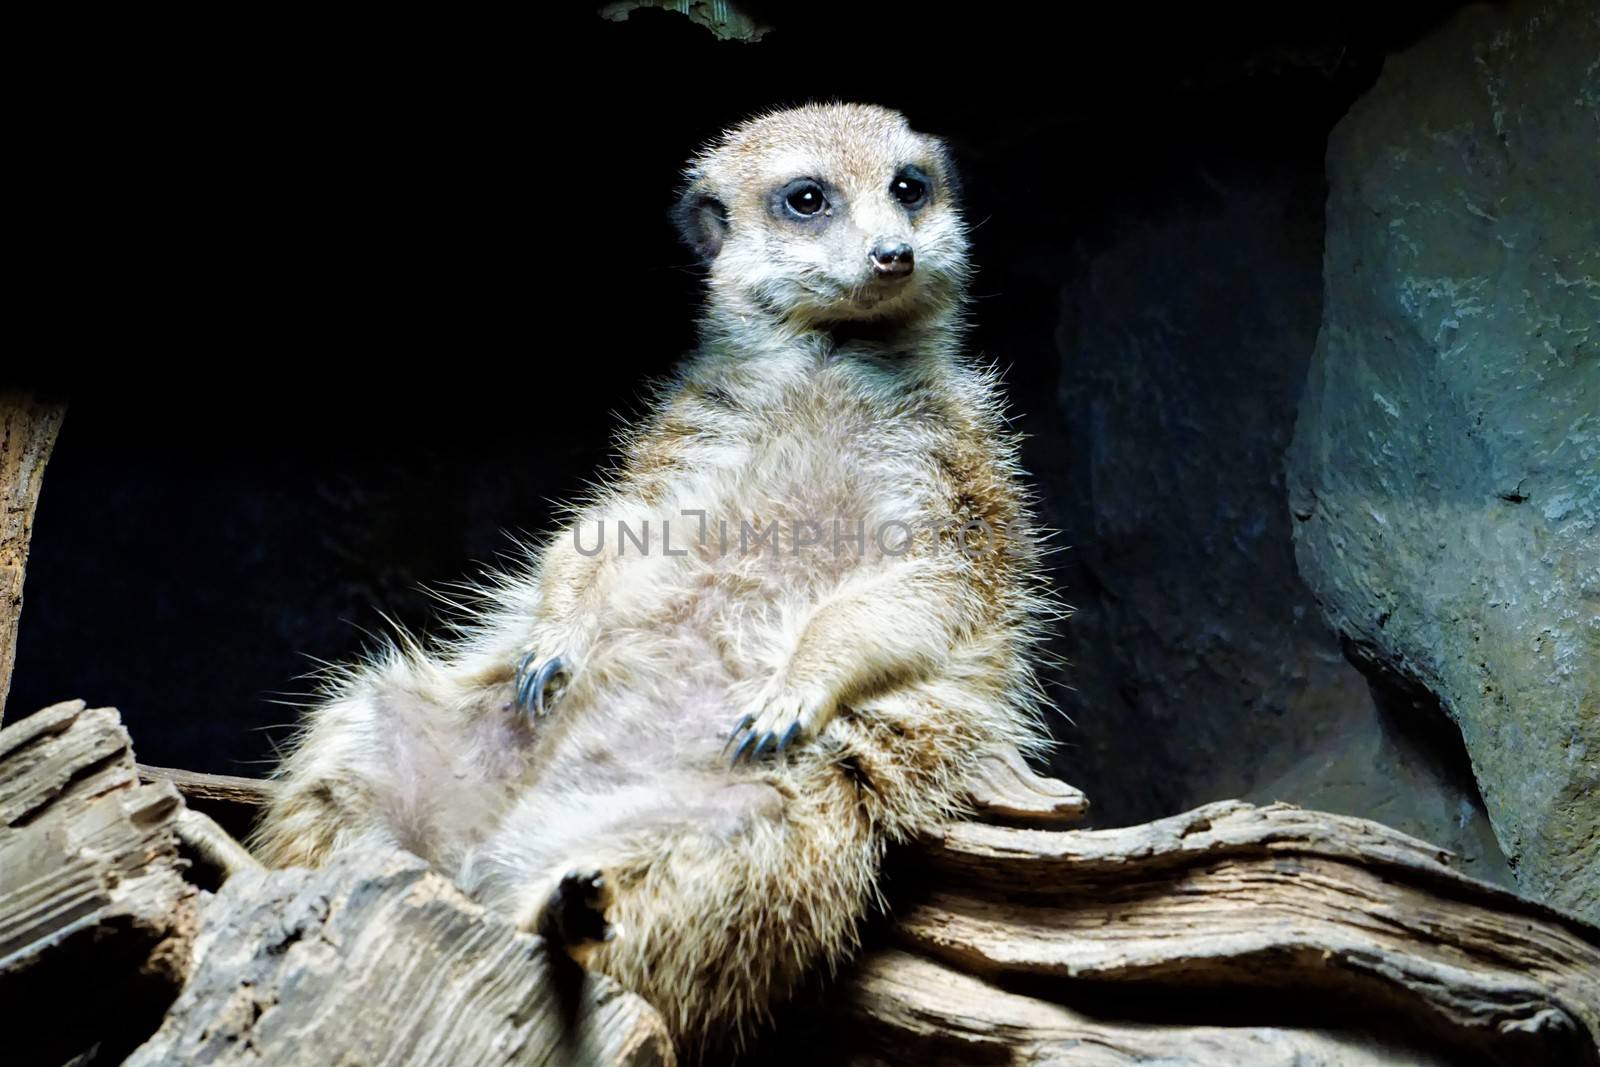 Meerkat sitting and chilling under lamp by pisces2386